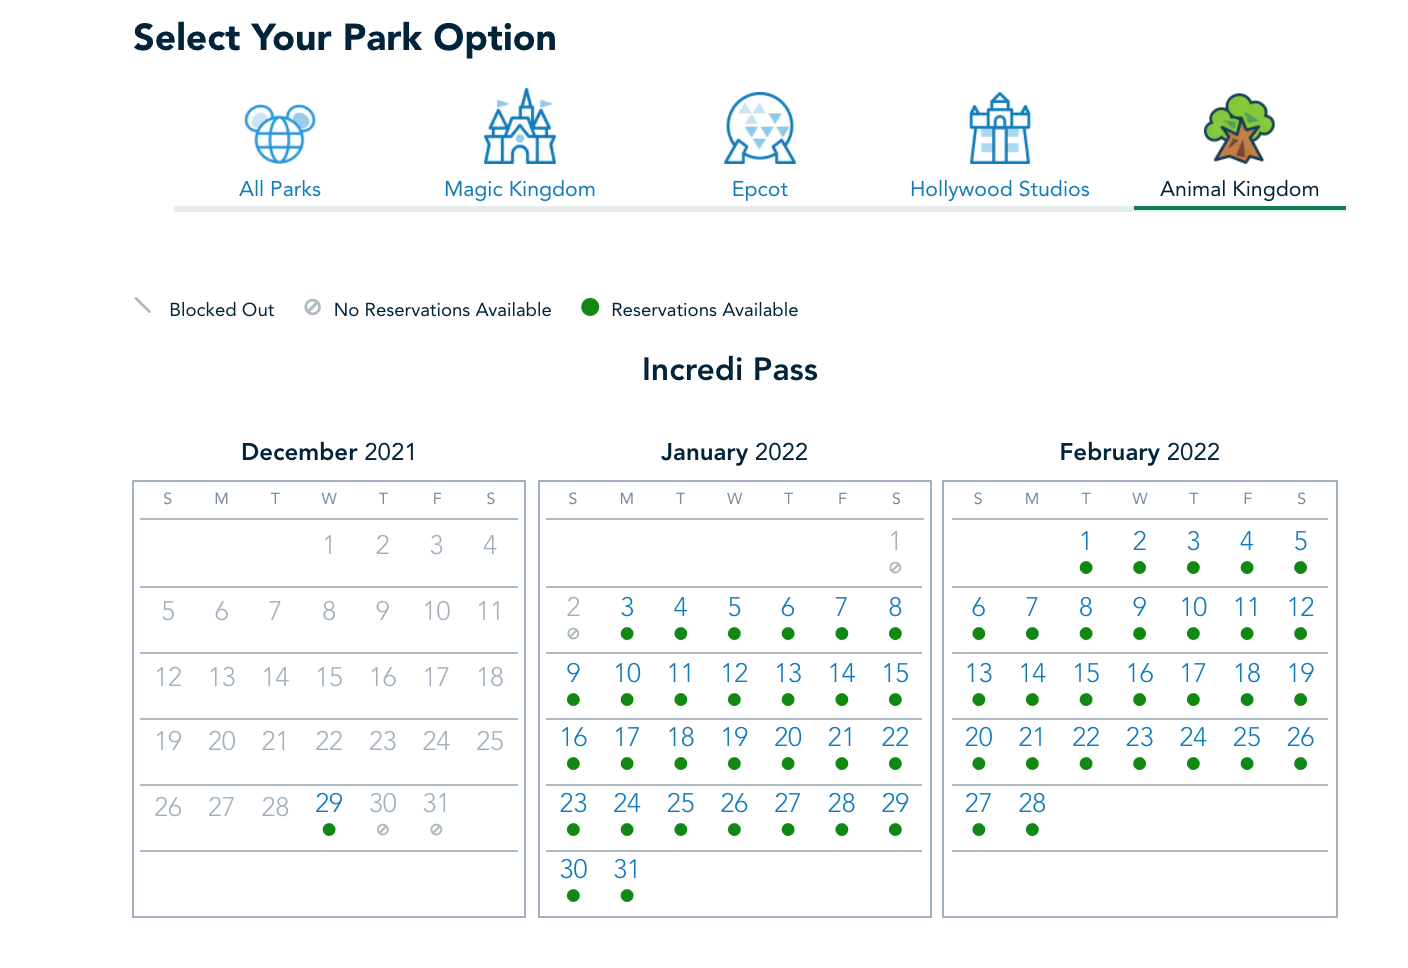 A Look at Disney World Park Reservation Availability for the First Week